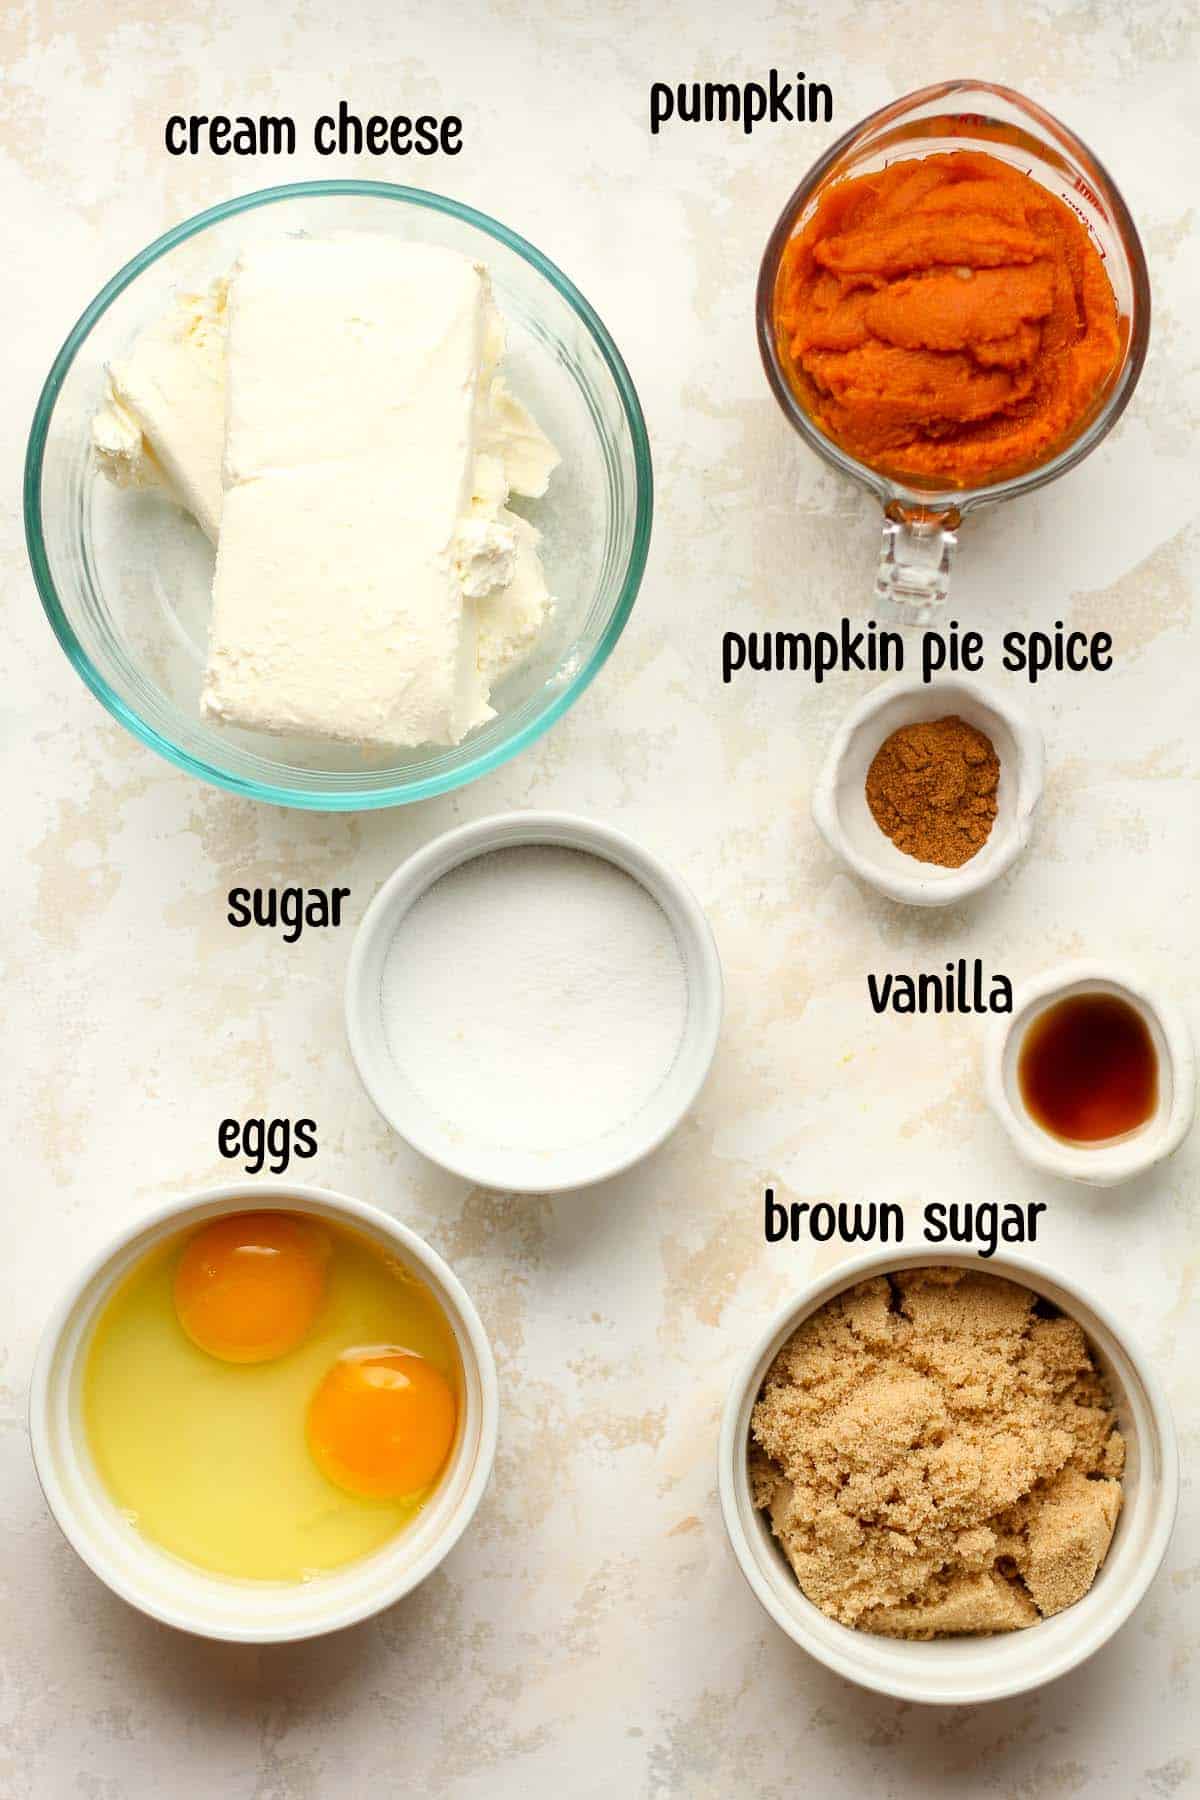 The labeled ingredients for the pumpkin cheesecake filling.